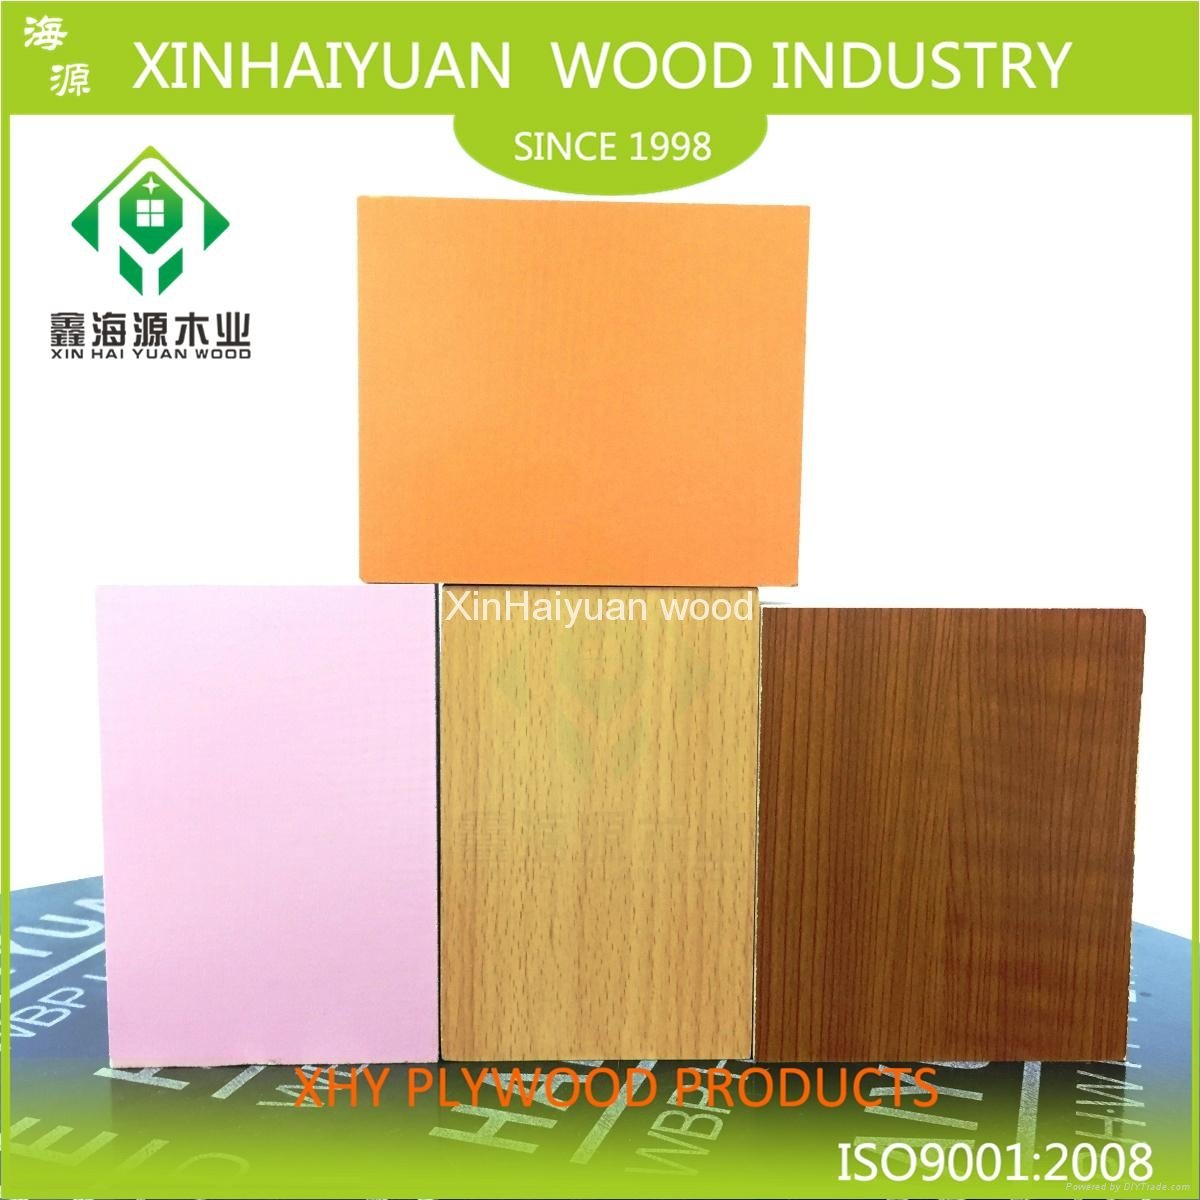 XHY 18mm Construction Plywood poplar core Pine and film faced can used as Buildi 2